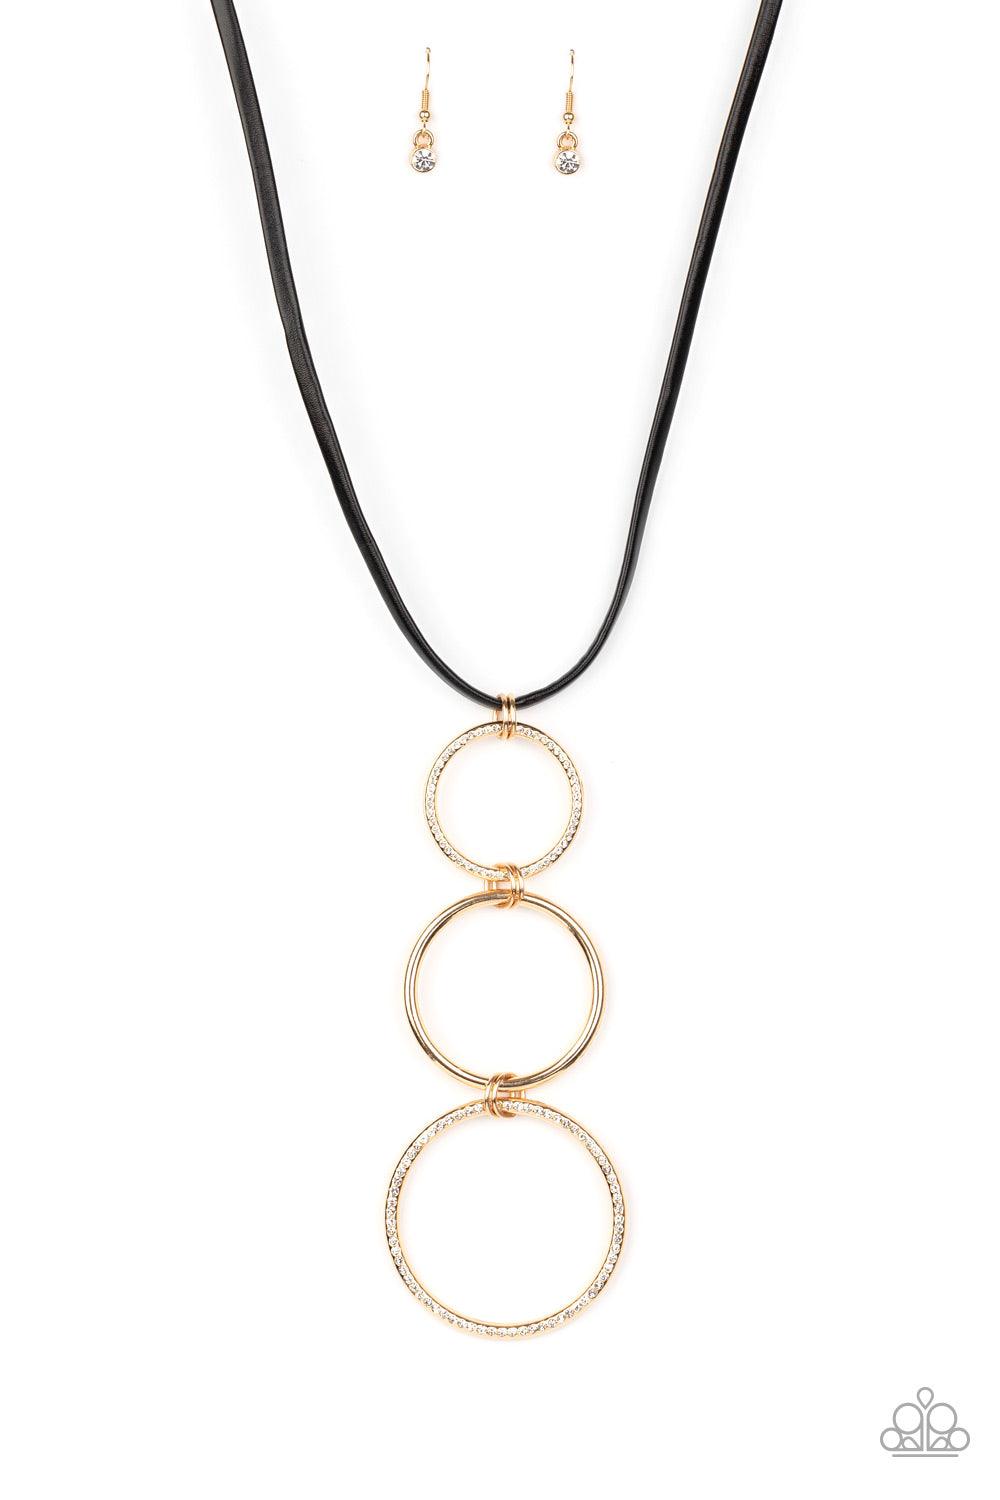 Paparazzi Accessories Curvy Couture - Gold Gradually increasing in size, two white rhinestone encrusted hoops link with a smooth gold hoop down the chest. The airy stacked pendant slides along a black leather cord for an elegantly edgy finish. Features an